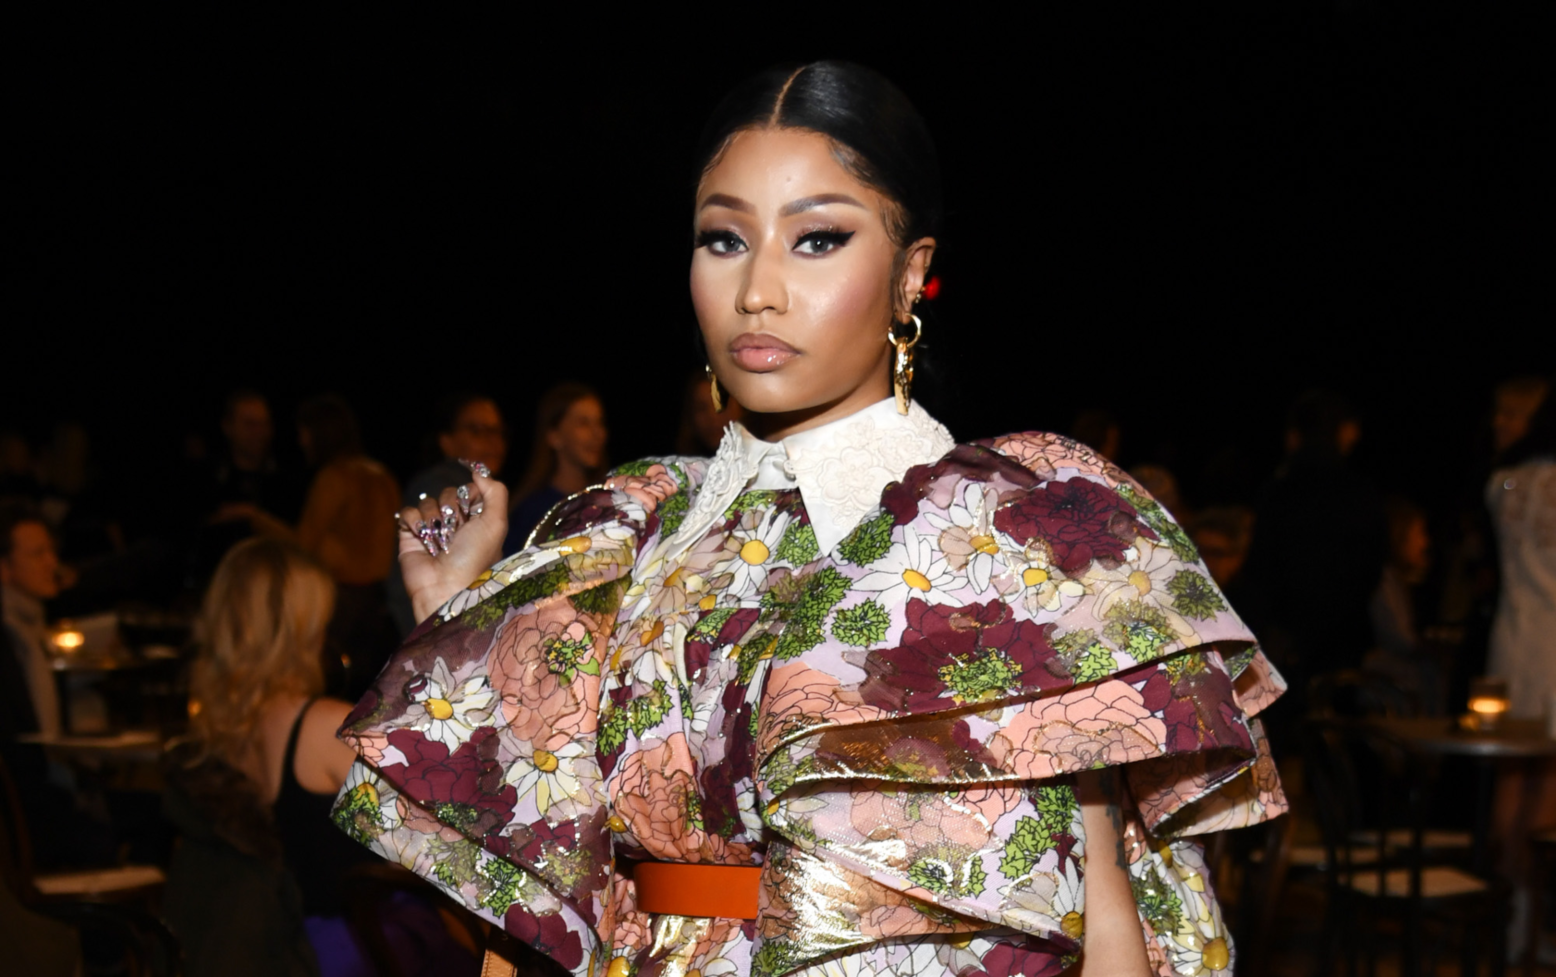 The Power Of Now! @nickiminaj The Queen was wearing Marc Jacobs